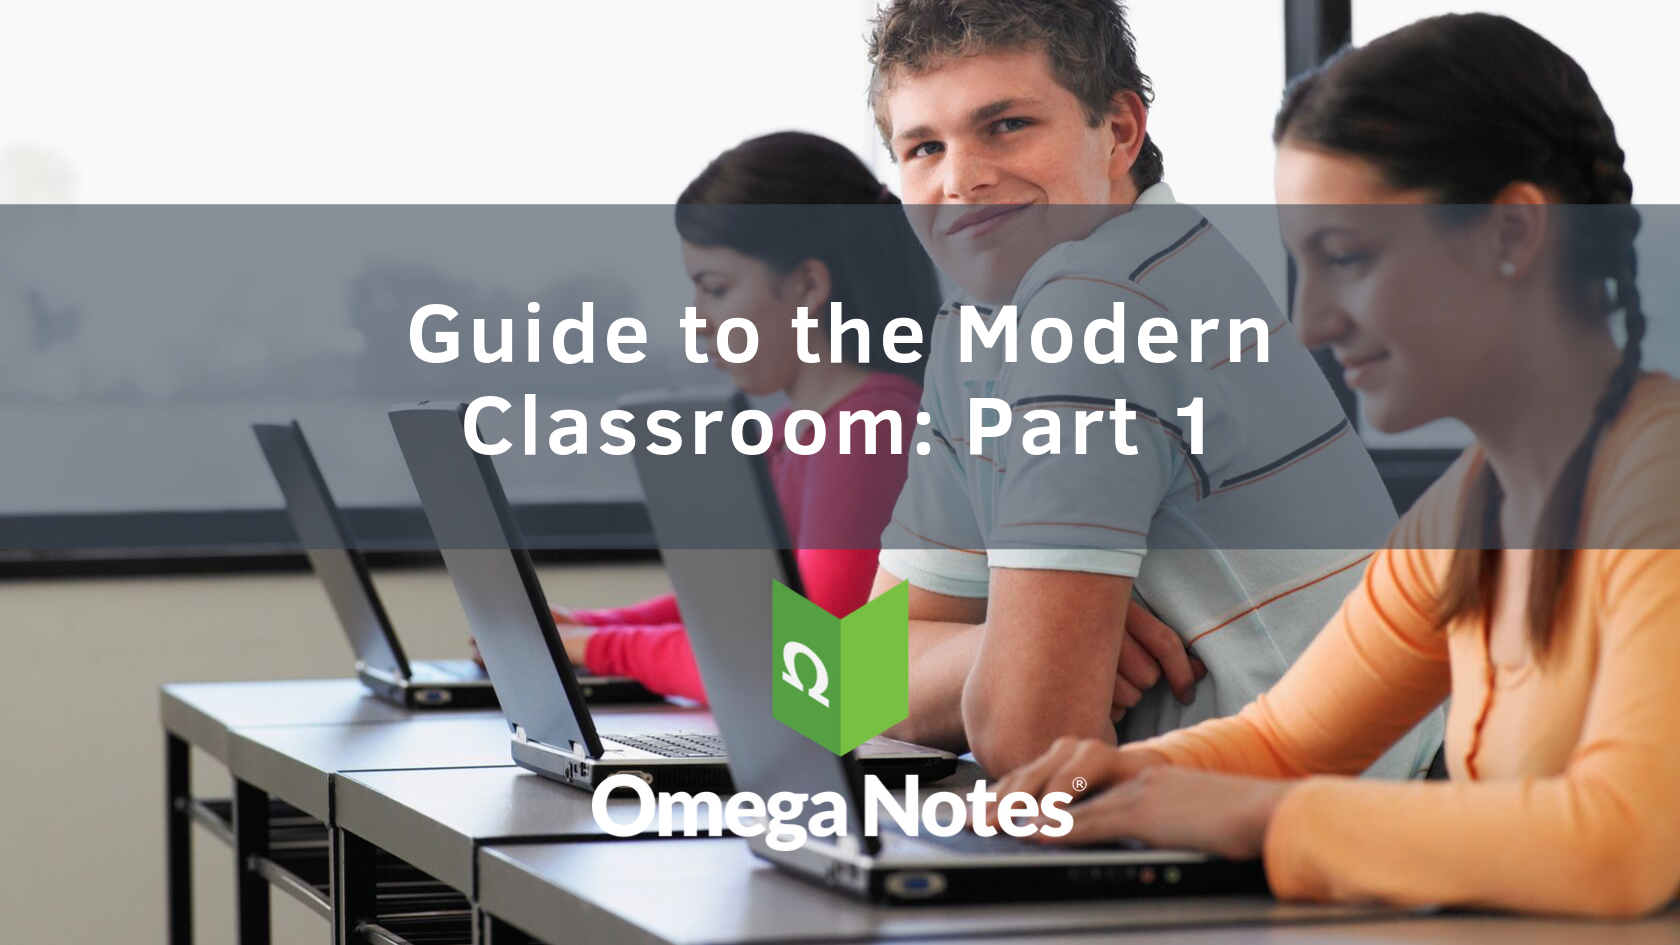 Guide to the Modern Classroom Part 1